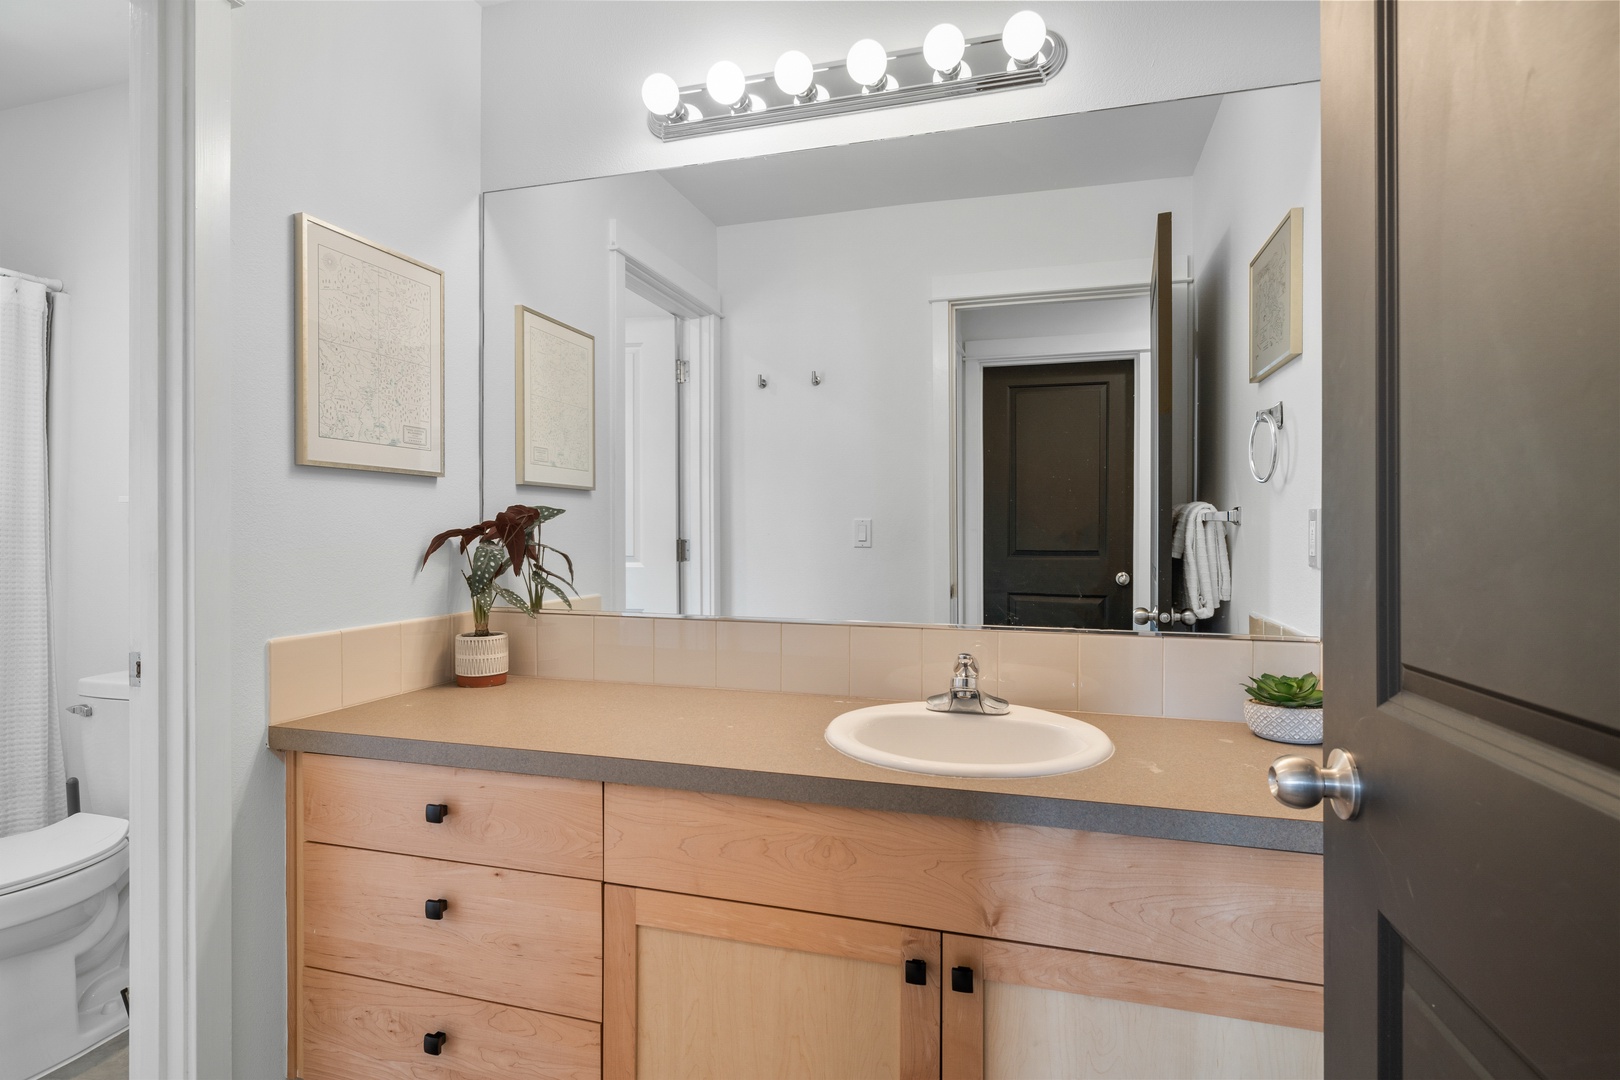 The 2nd floor hall bath offers a large vanity & shower/tub combo